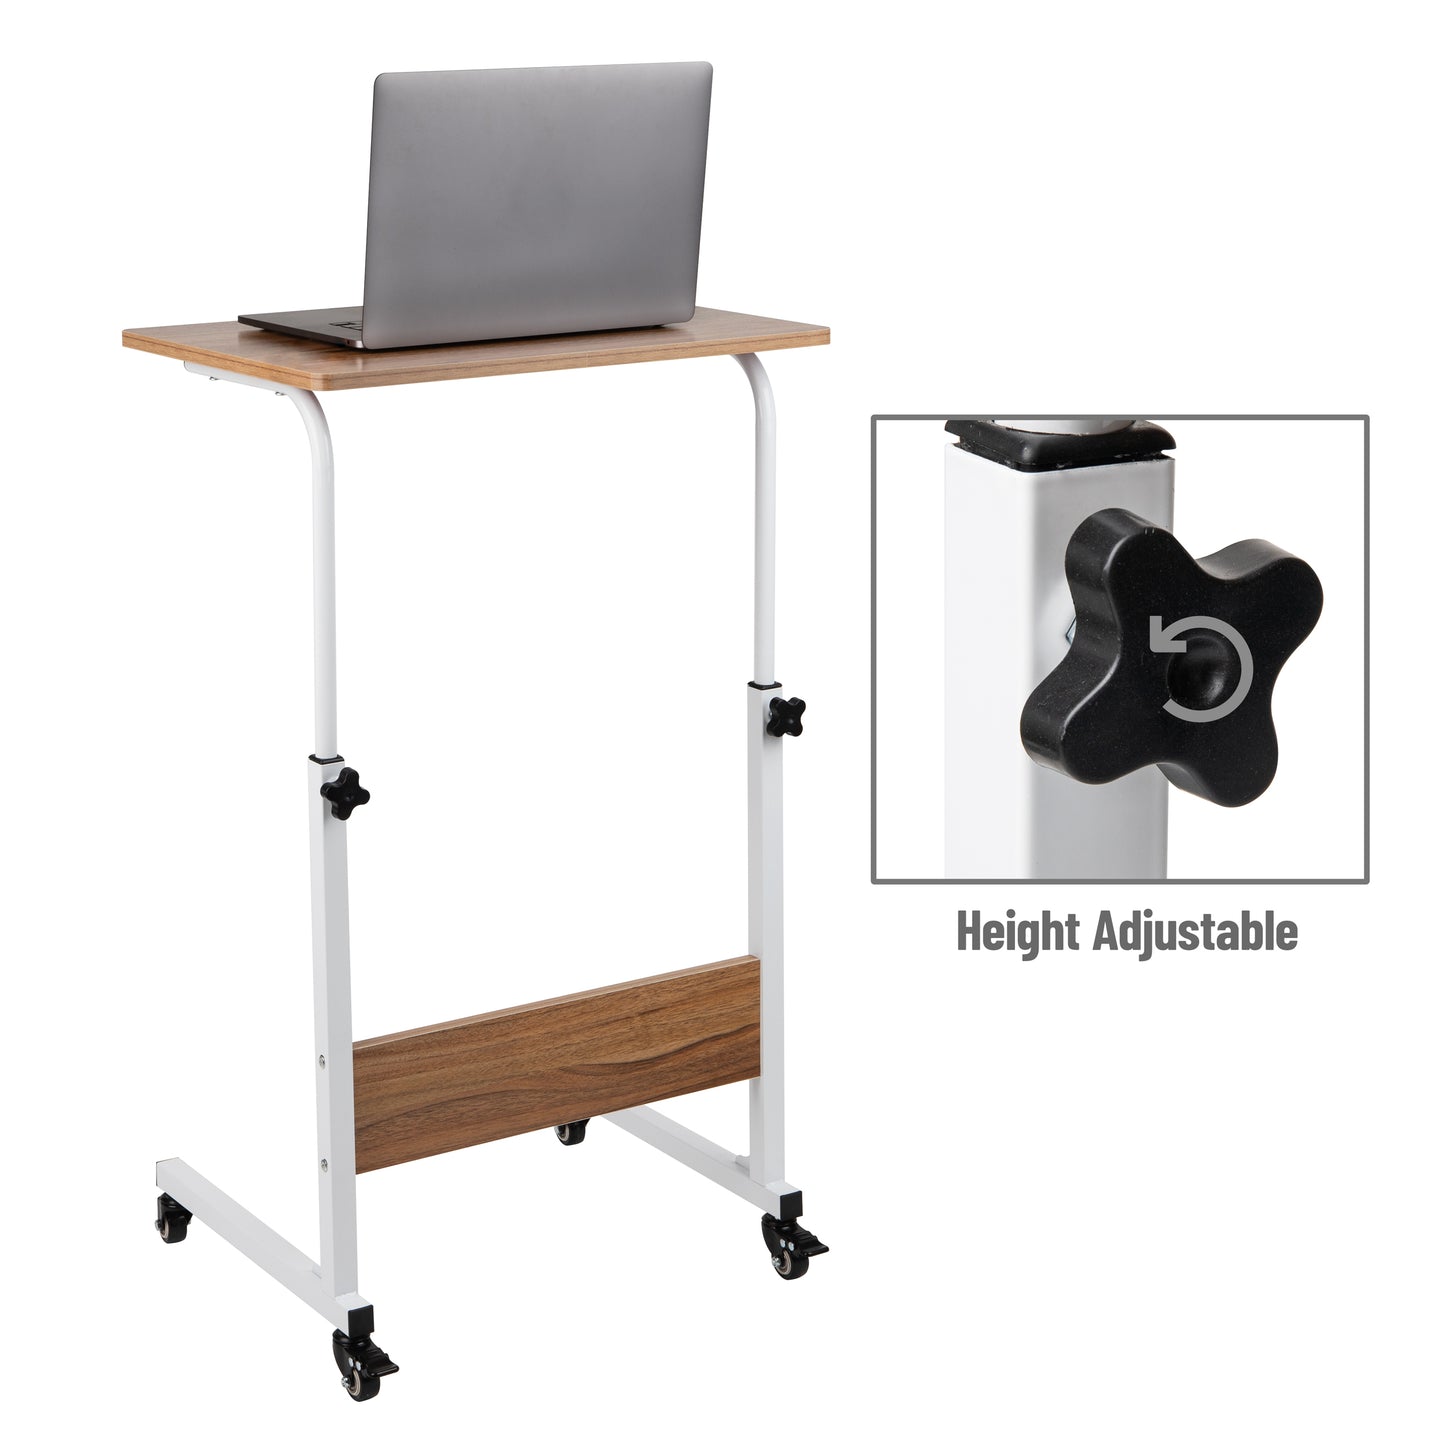 Mind Reader Standing Desk, Laptop Stand, Height Adjustable, Computer Table, Work Table, MDF, 21.75"L x 15.75"W x 33"H, White